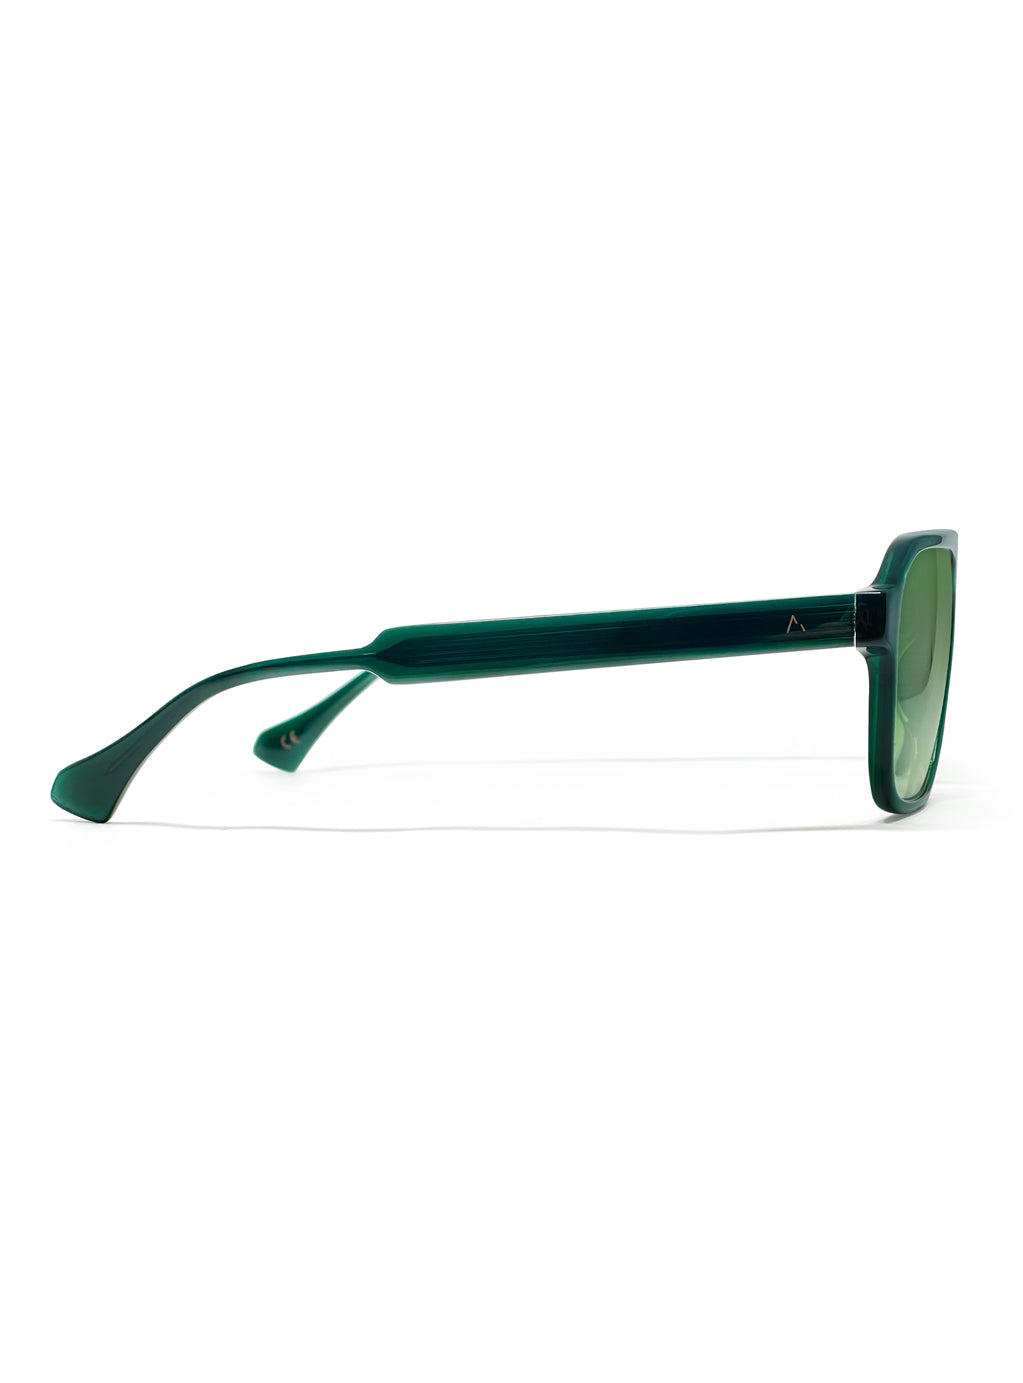 Double-B  Green with Green Gradient Lenses